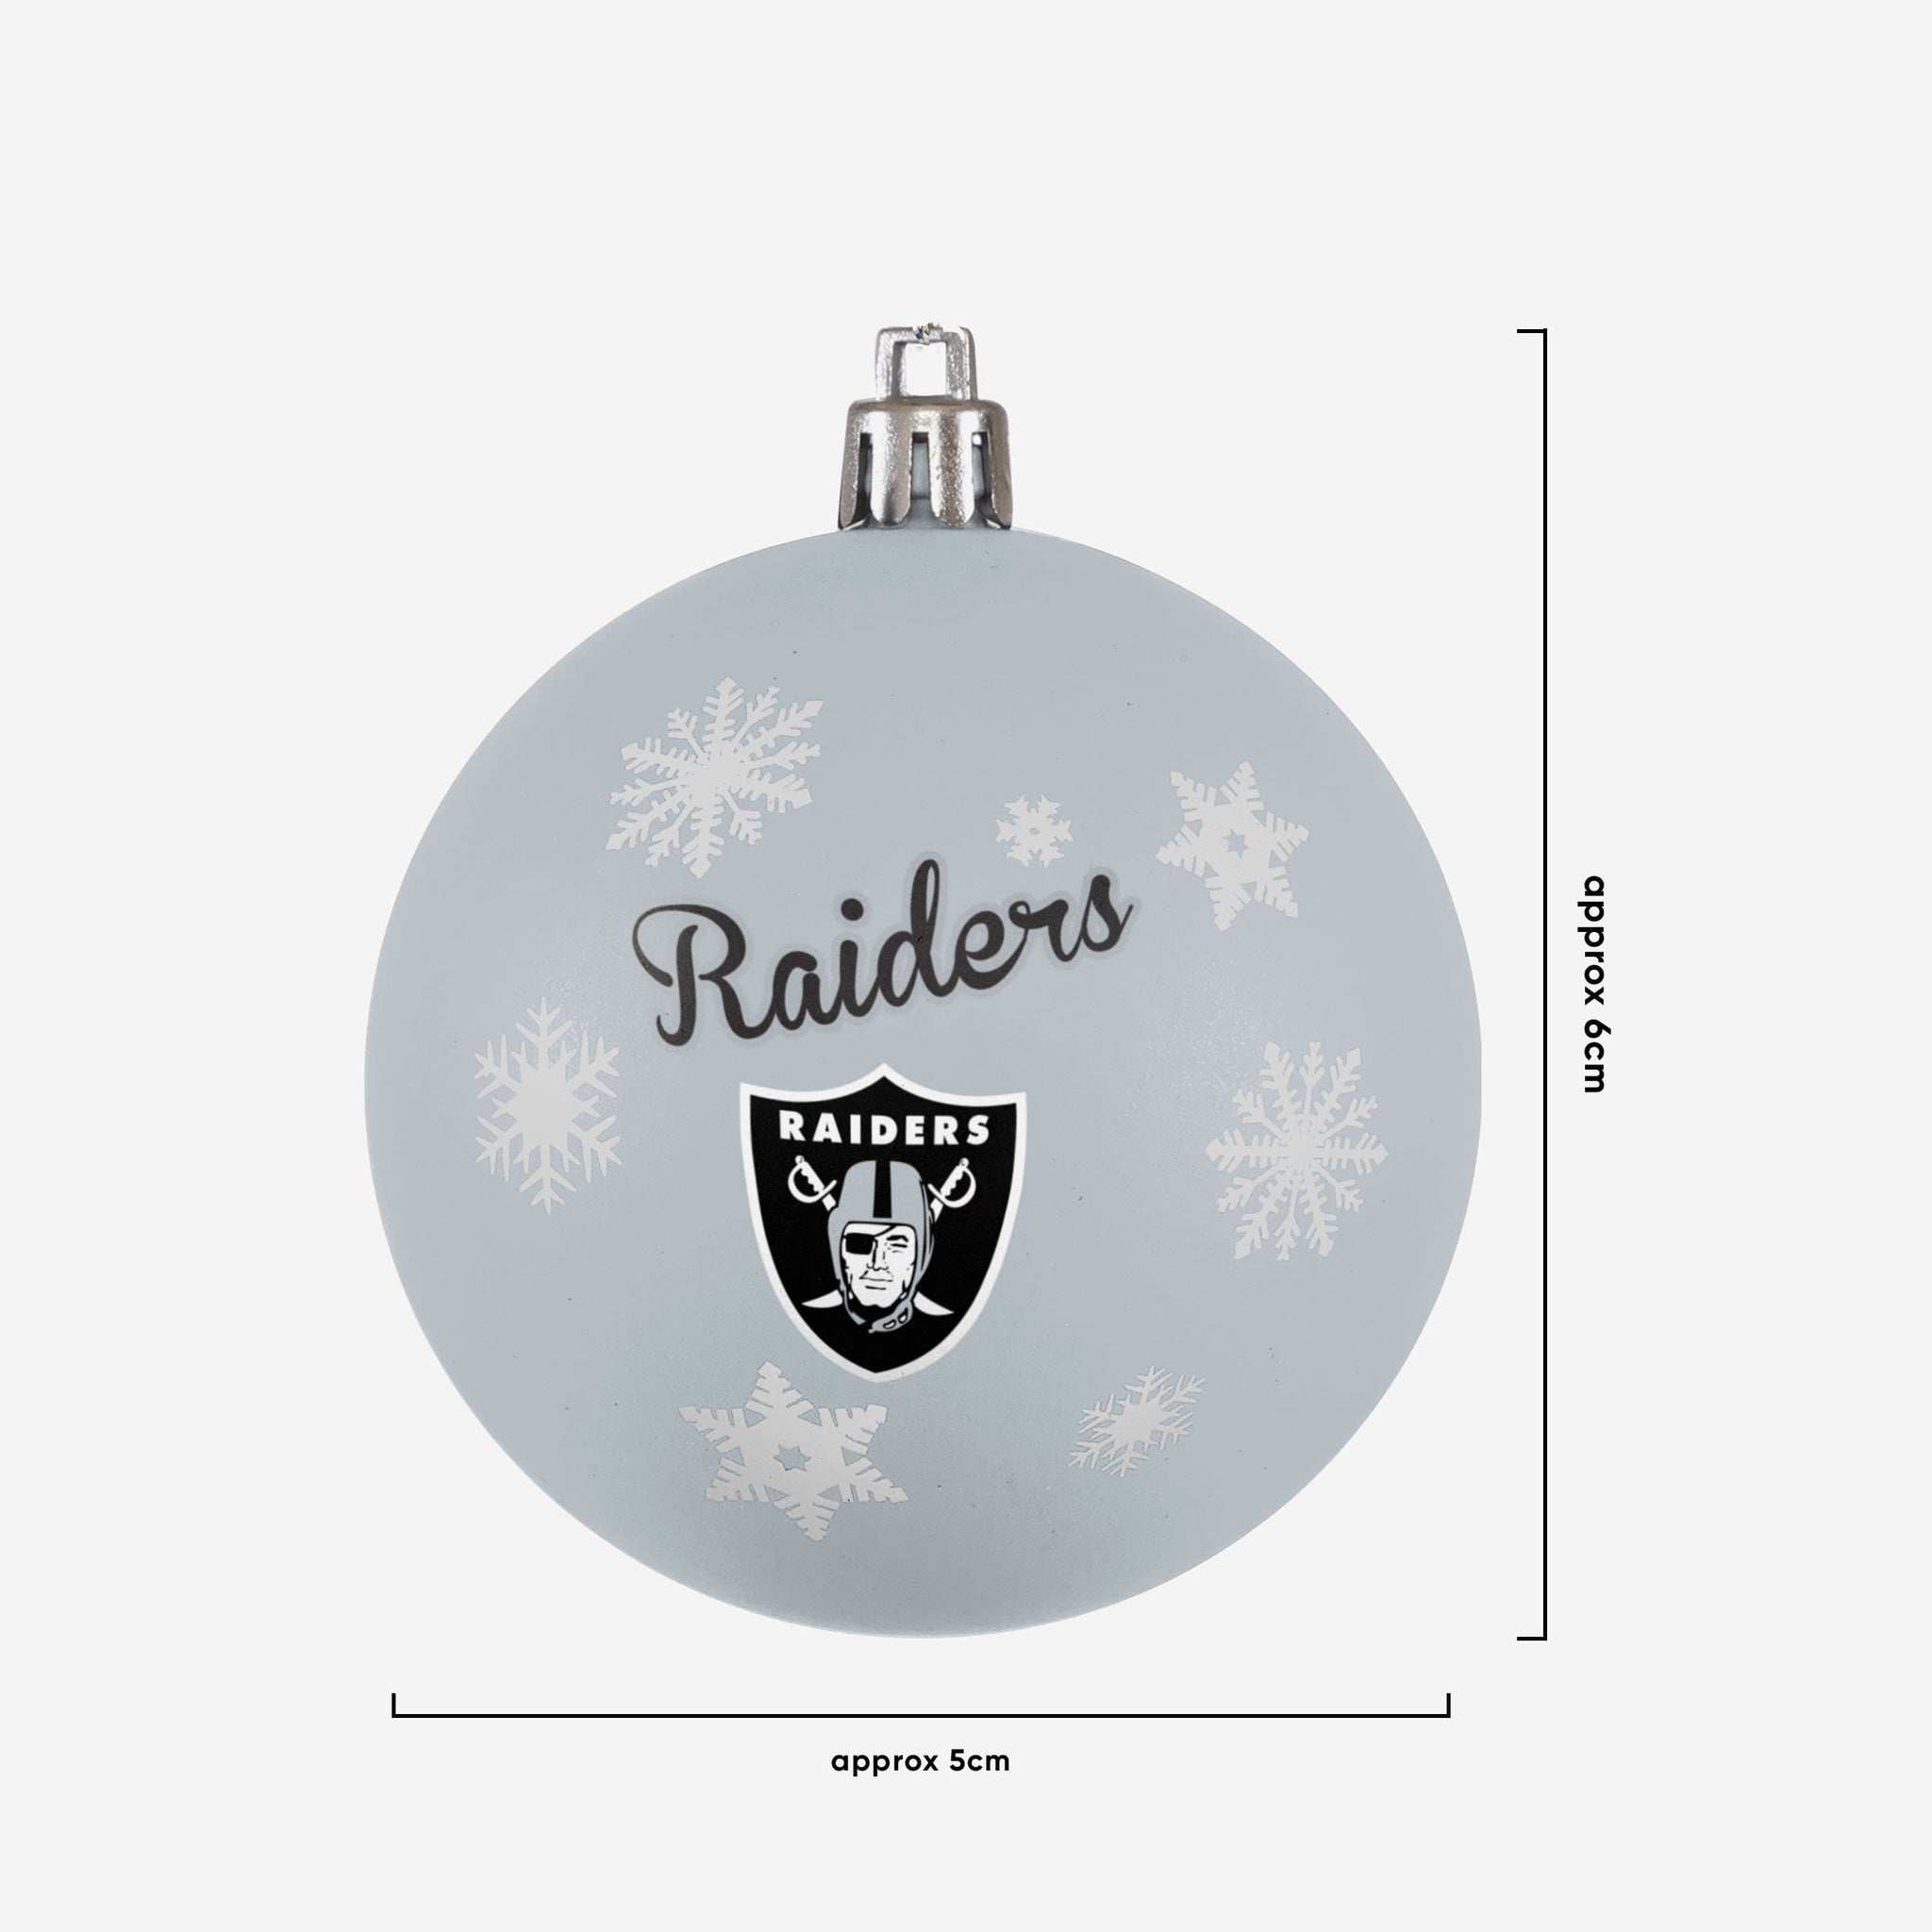 NFL Oakland Raiders Large Collectible Ornament